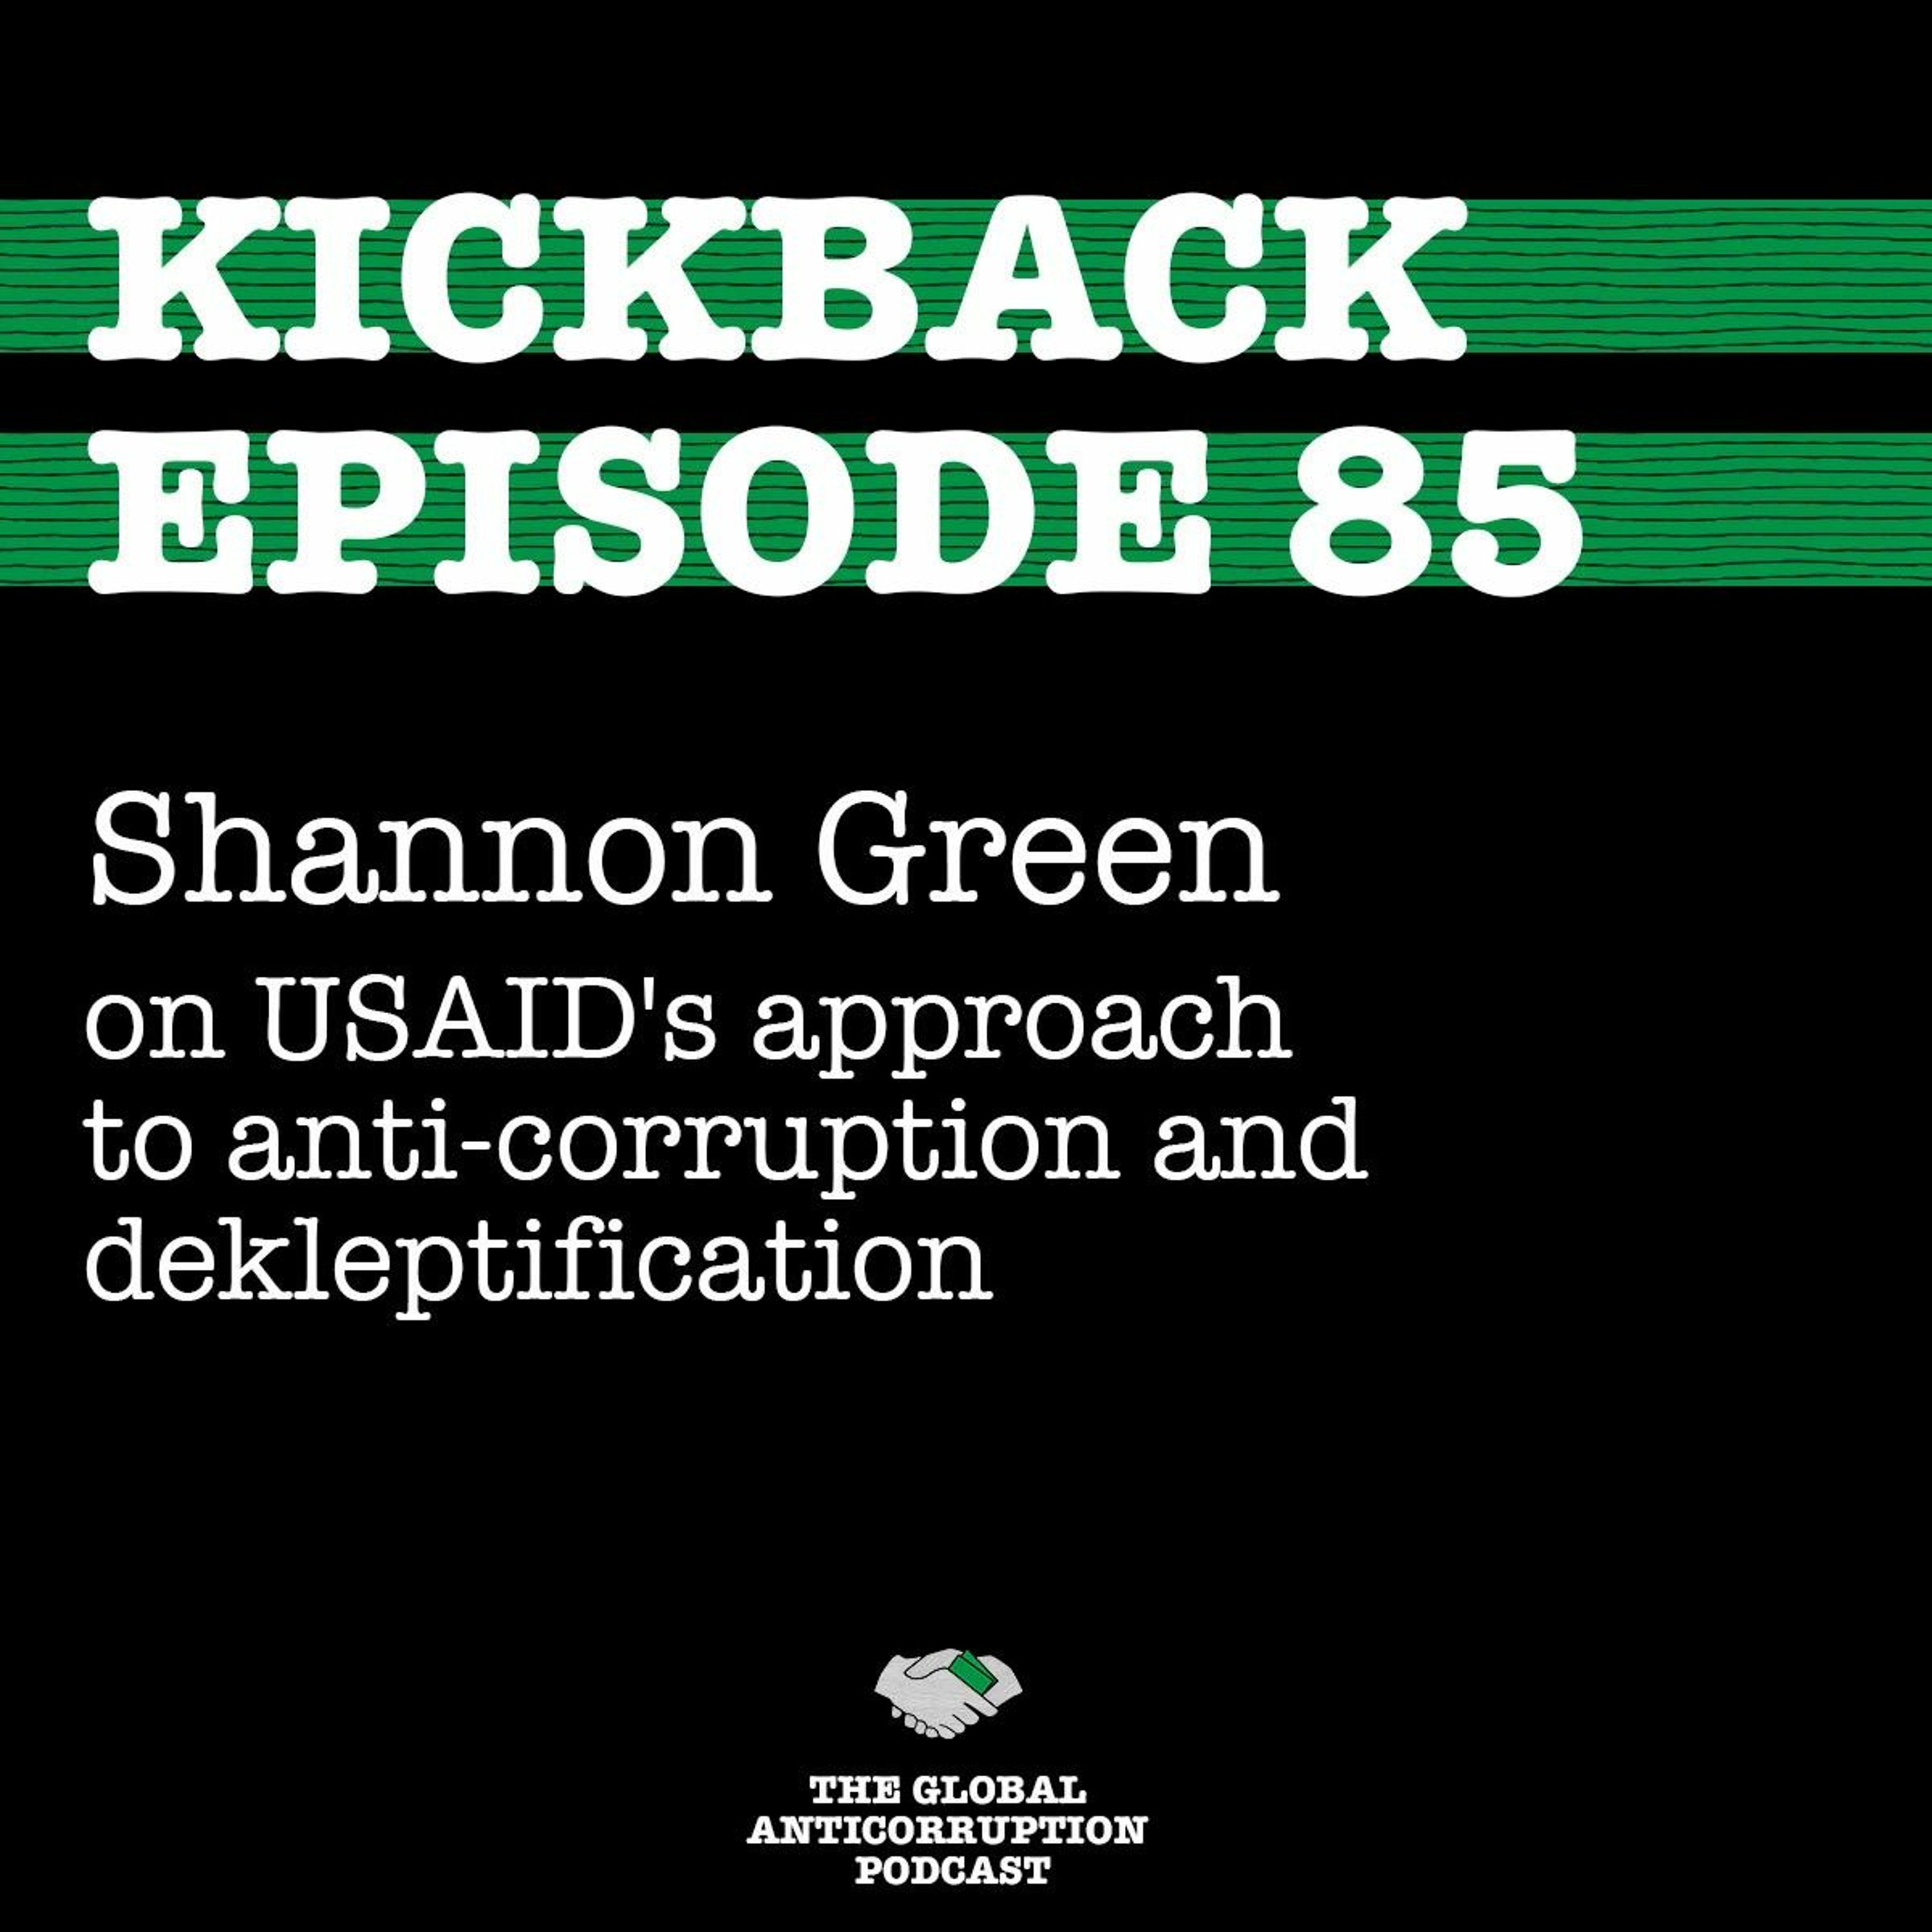 85. Shannon Green on USAID's approach to anti-corruption and dekleptification